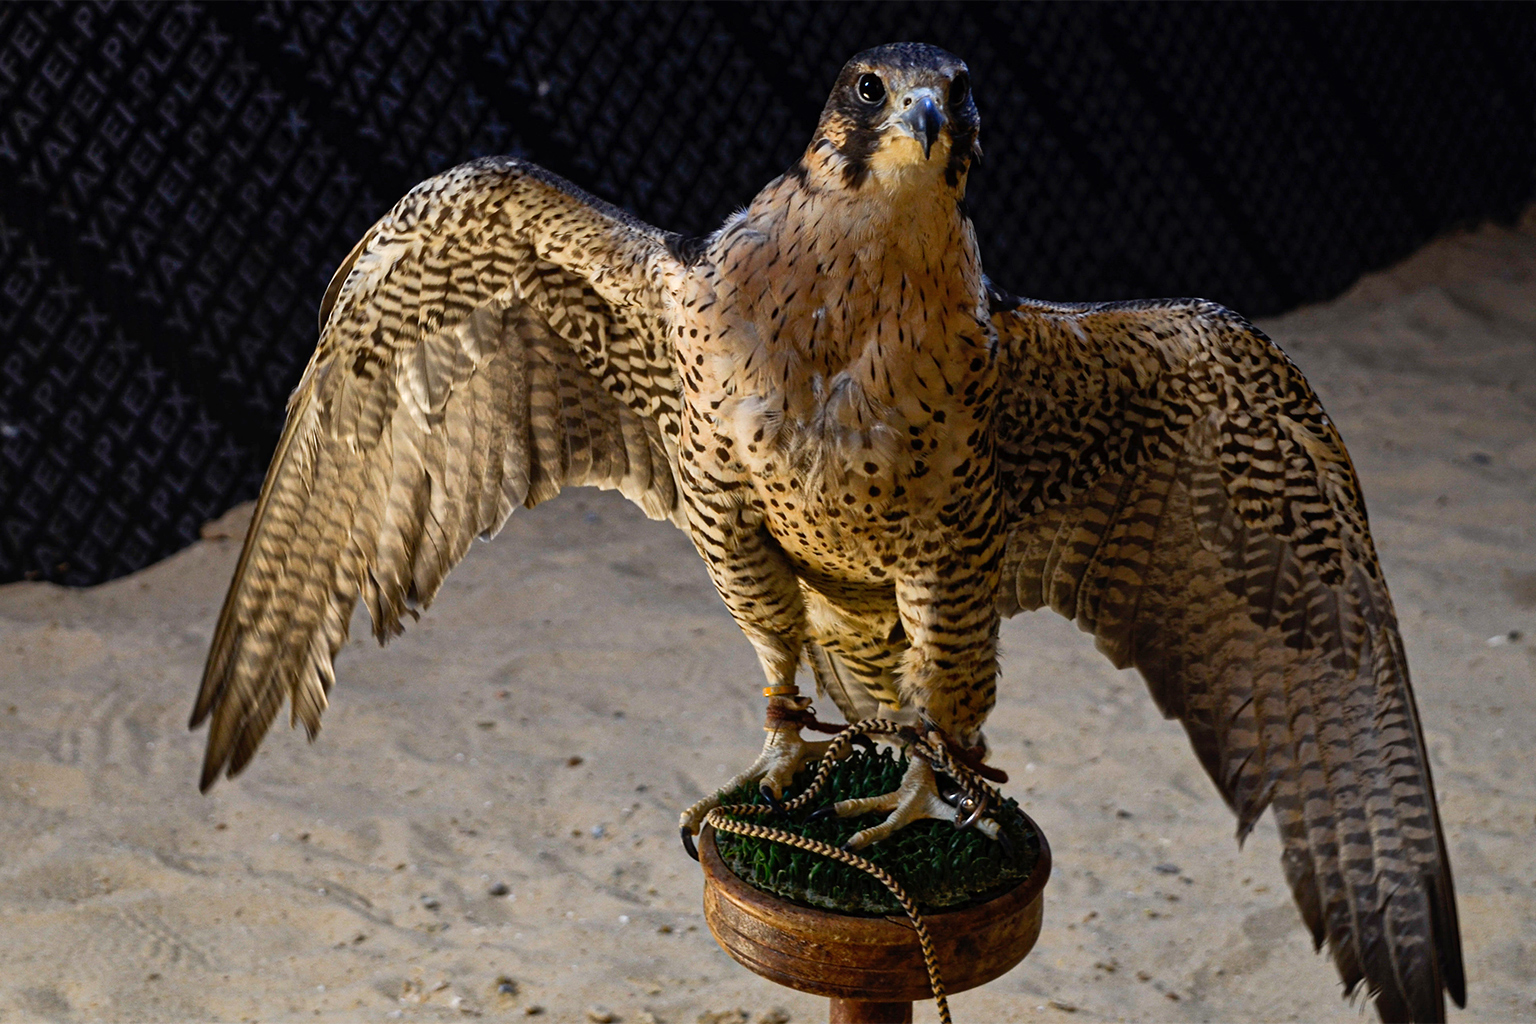 A rescued falcon, likely a peregrine